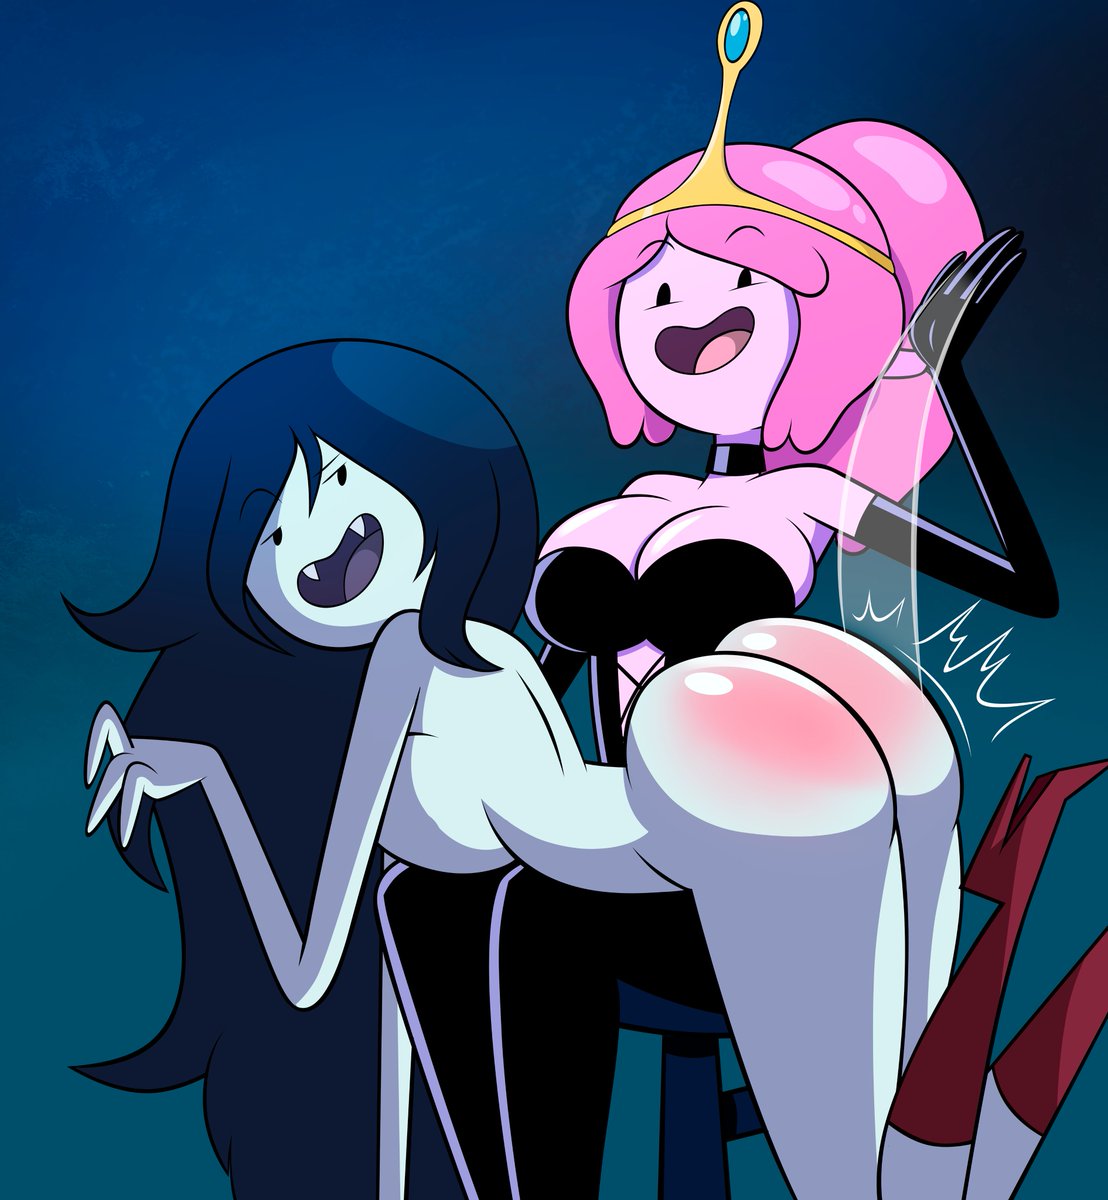 Commission for @Ednais69 who ordered Bubblegum spanking Marceline while the...